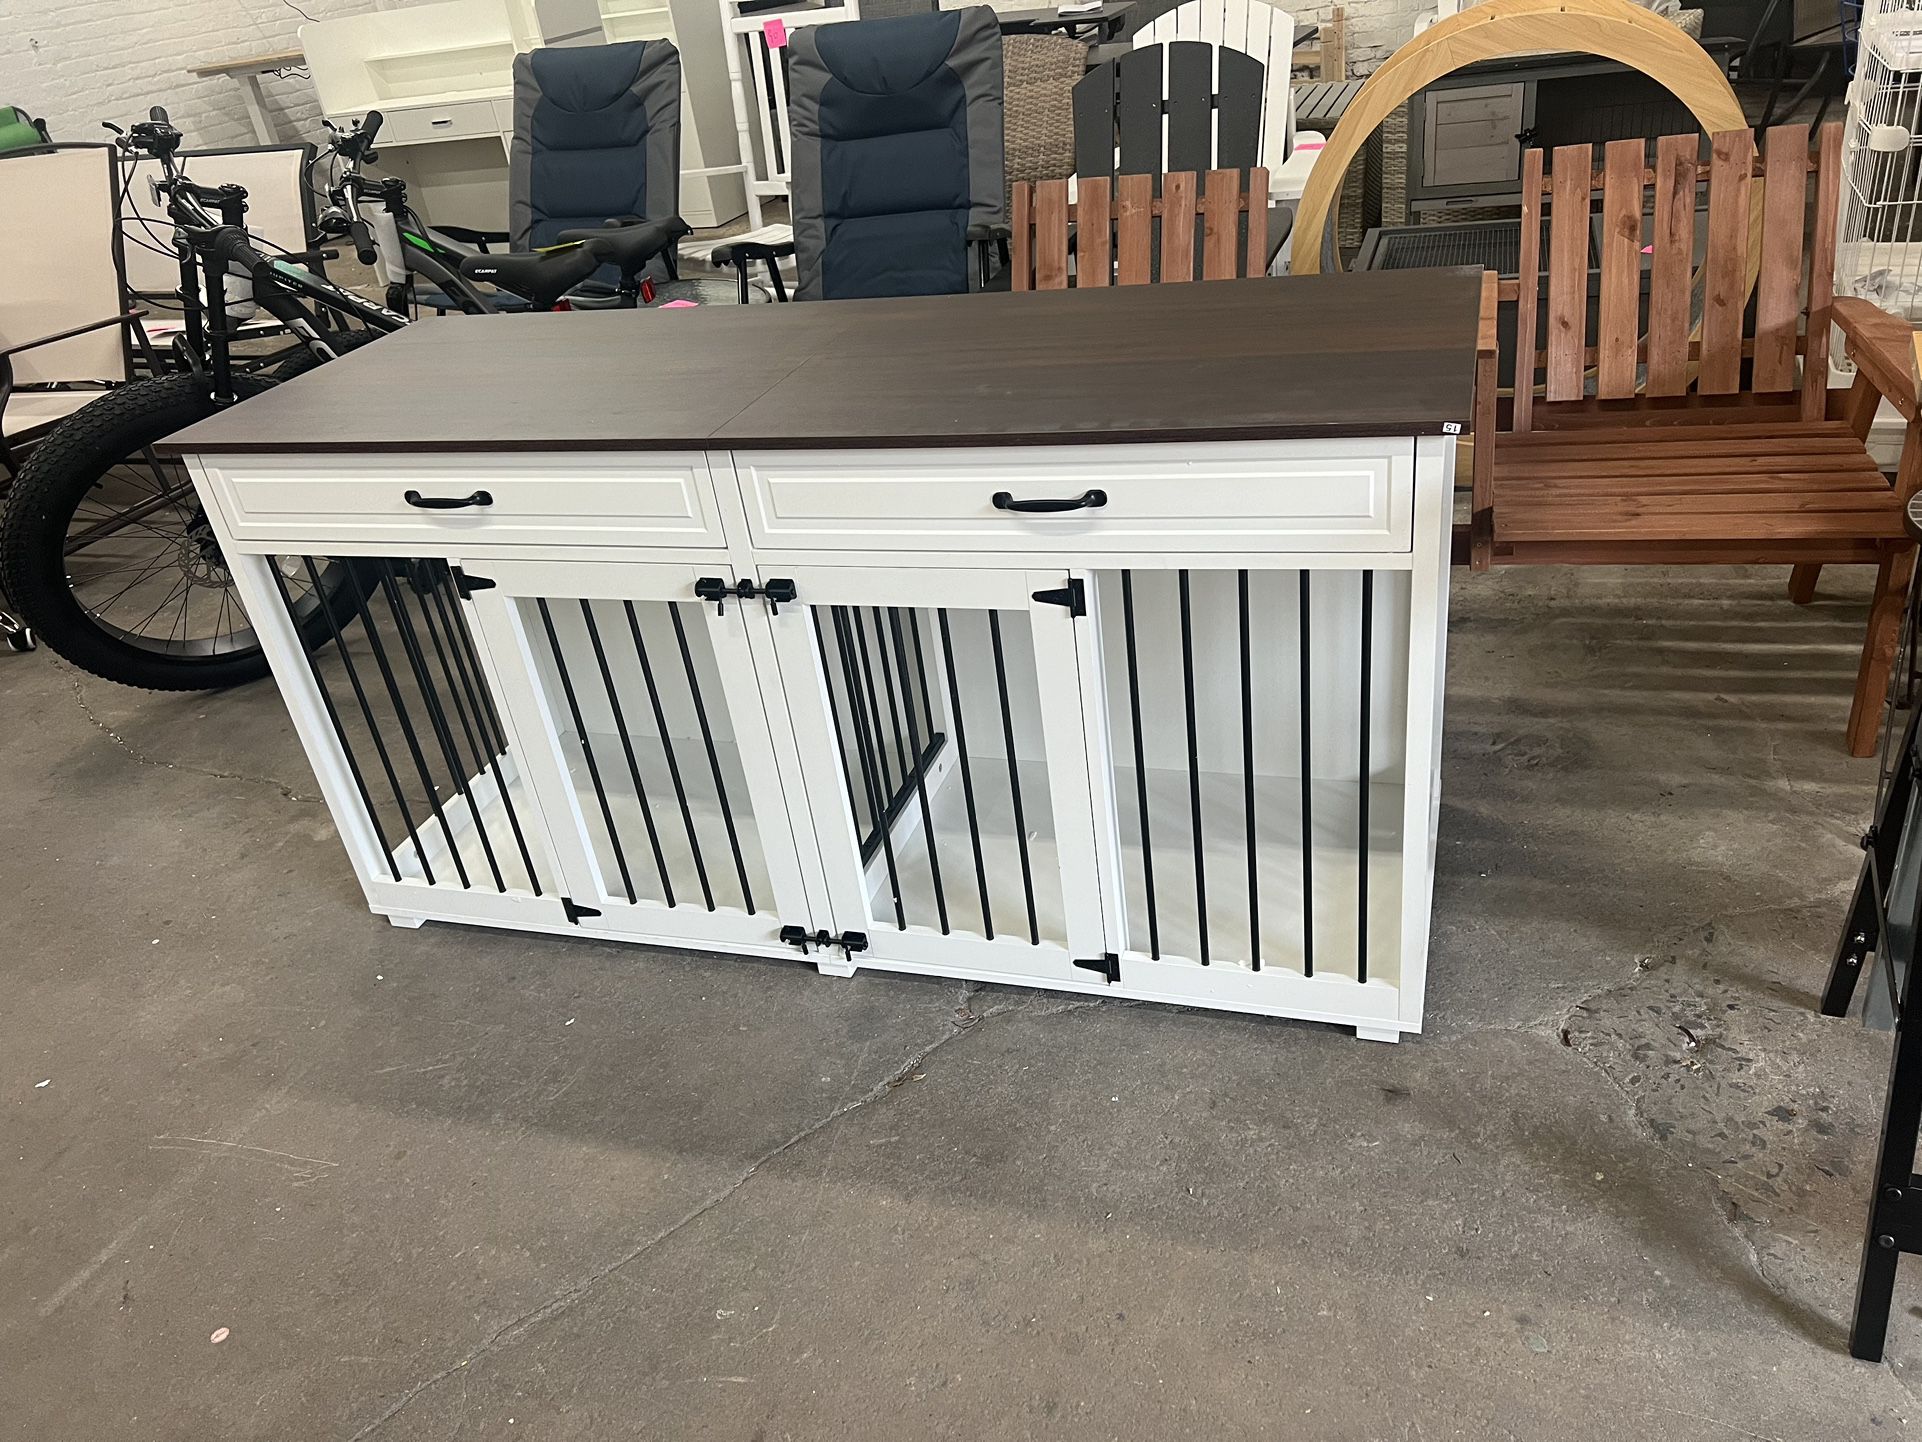 Large Dog Crate Furniture, 64.6" Wooden Dog Crate Kennel with 2 Drawers and Divider, L Heavy Duty Dog Crates Cage Furniture for Medium Dog or 2 Small 